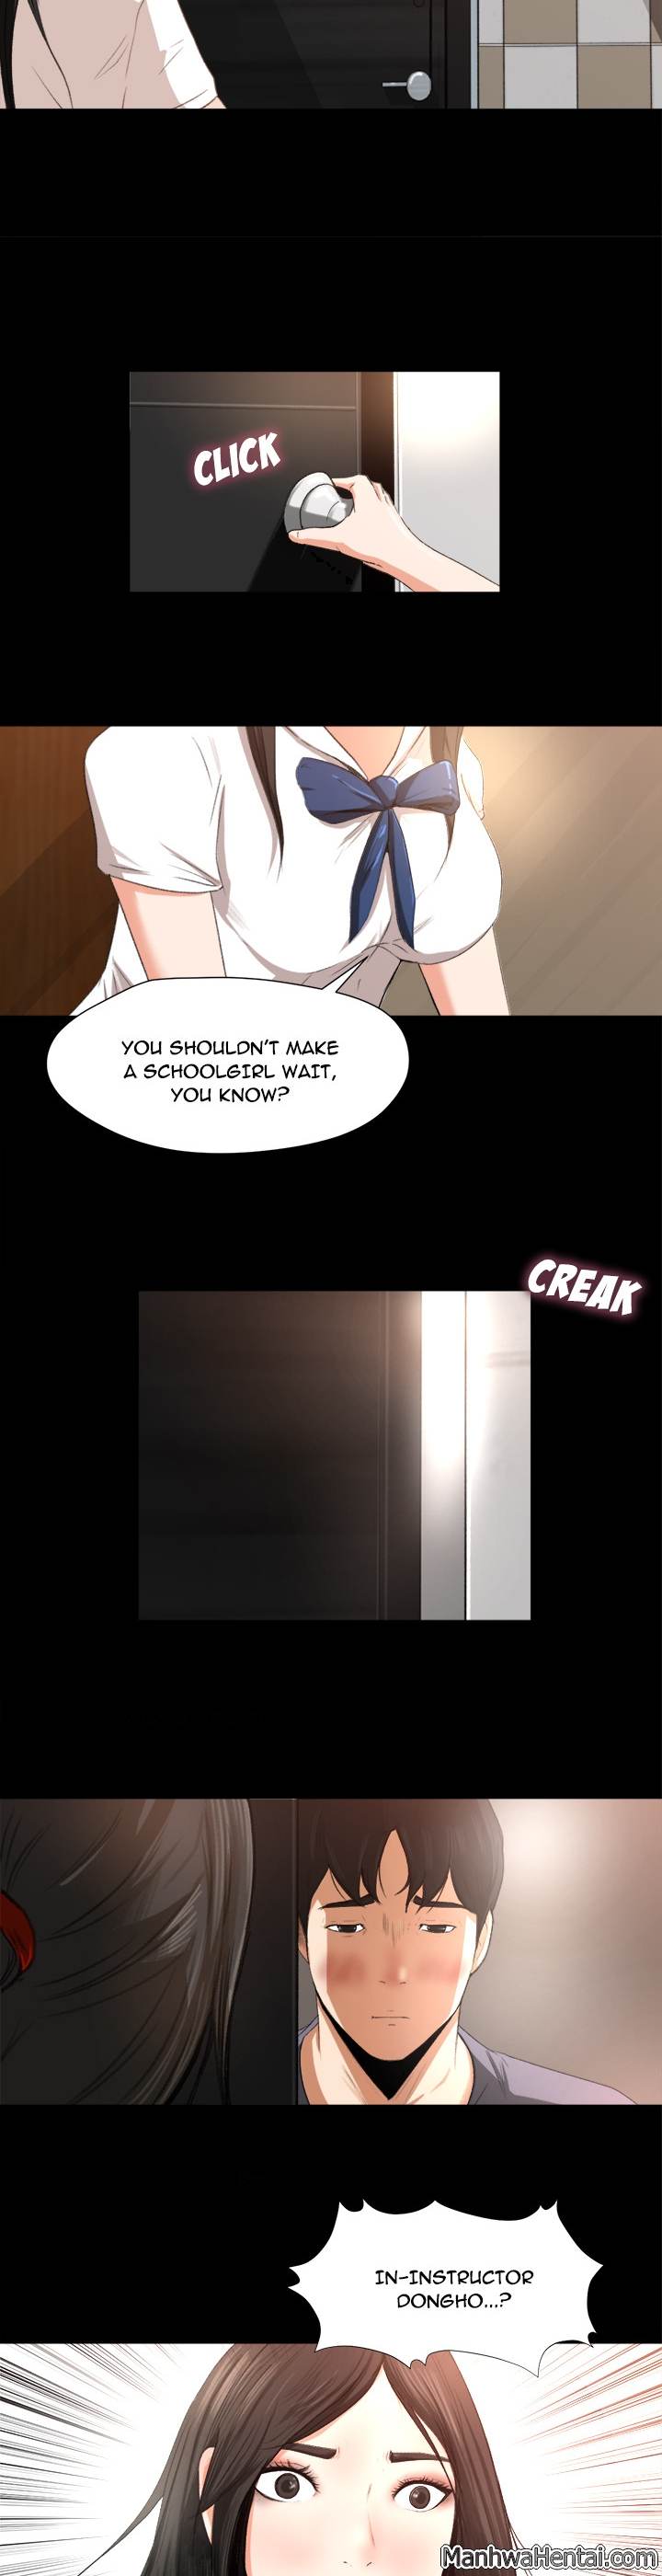 Inside the Uniform - Chapter 1 Page 33